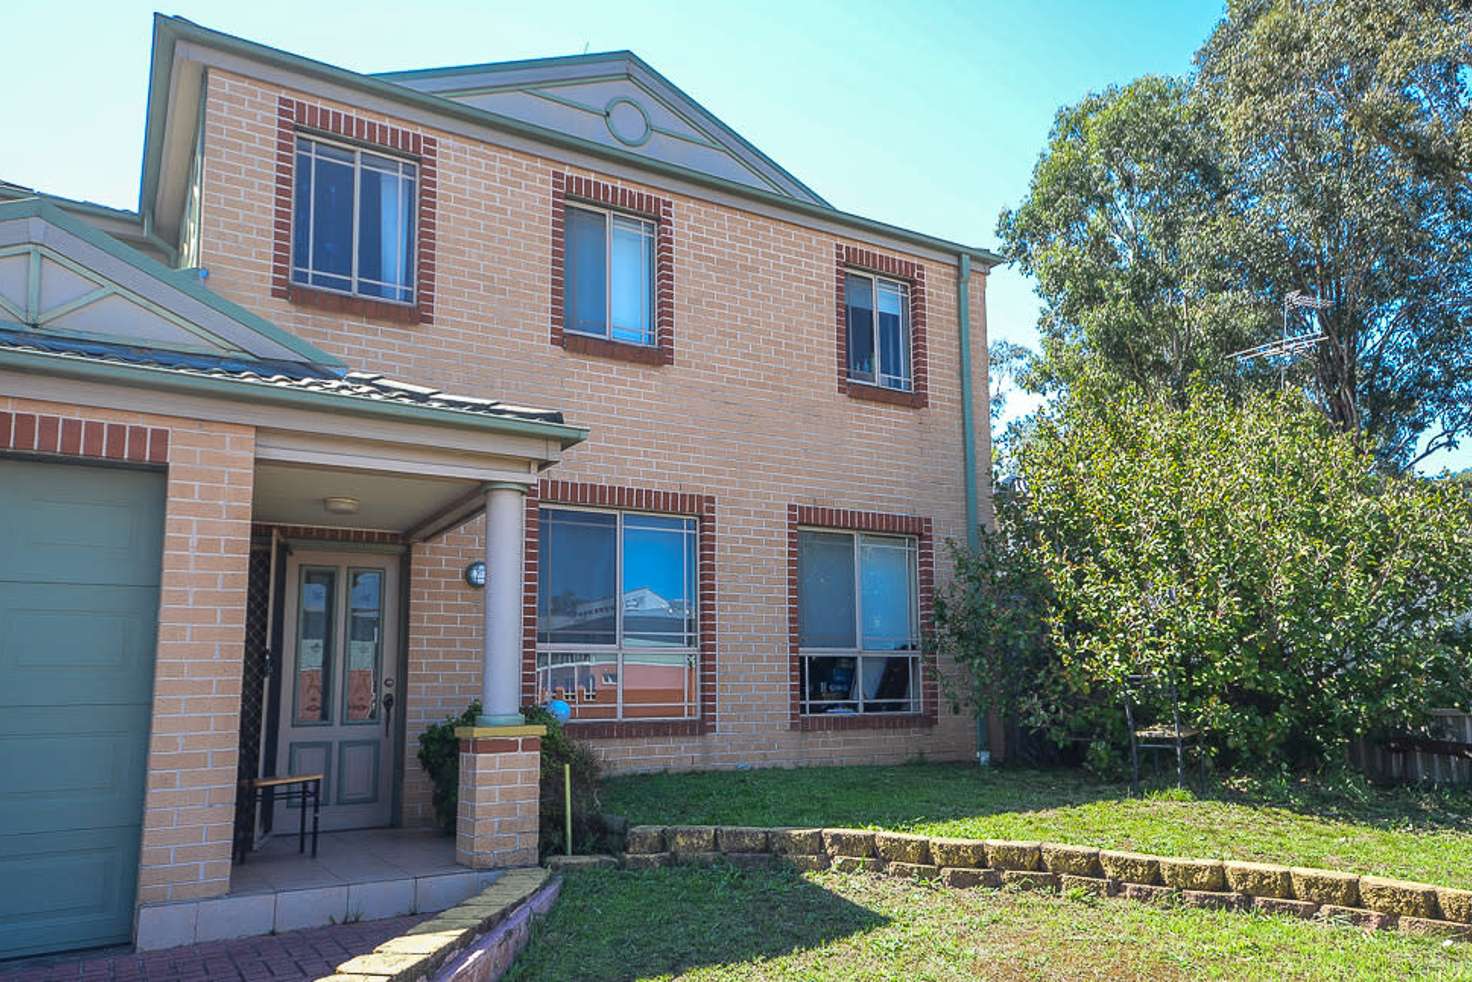 Main view of Homely house listing, 186 James Cook Drive, Kings Langley NSW 2147